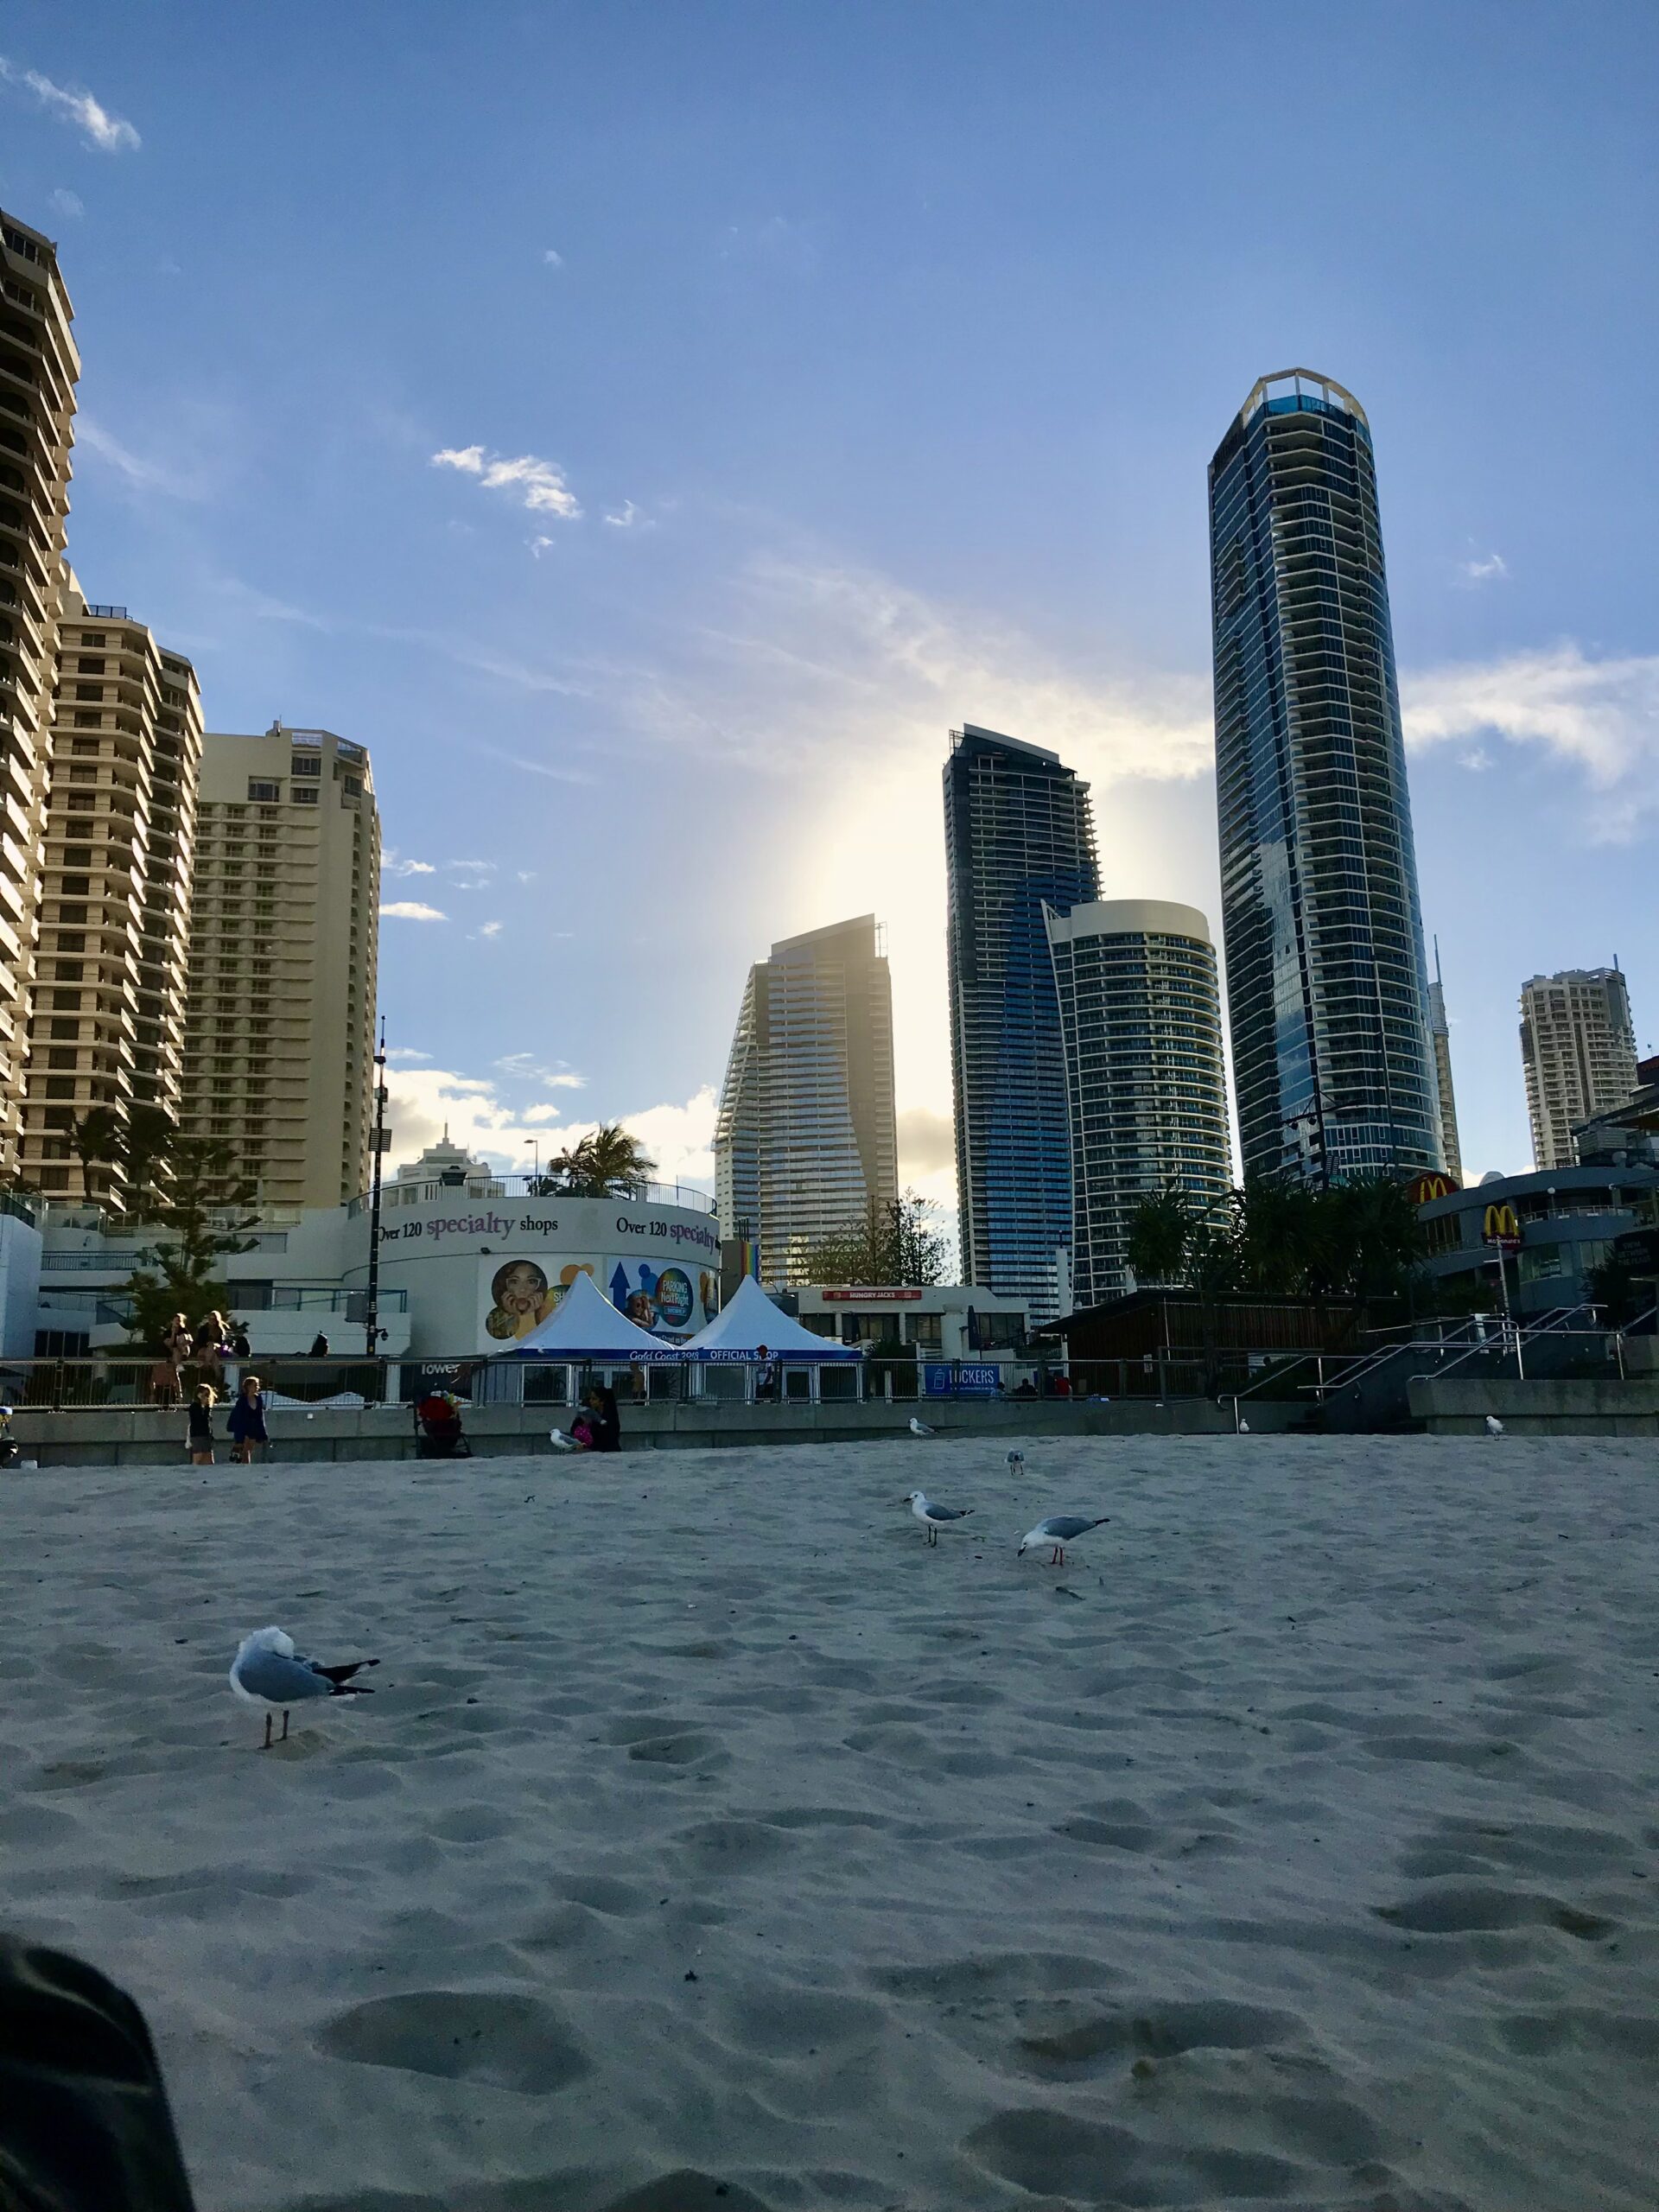 Surfer's paradise is a must see in Australia